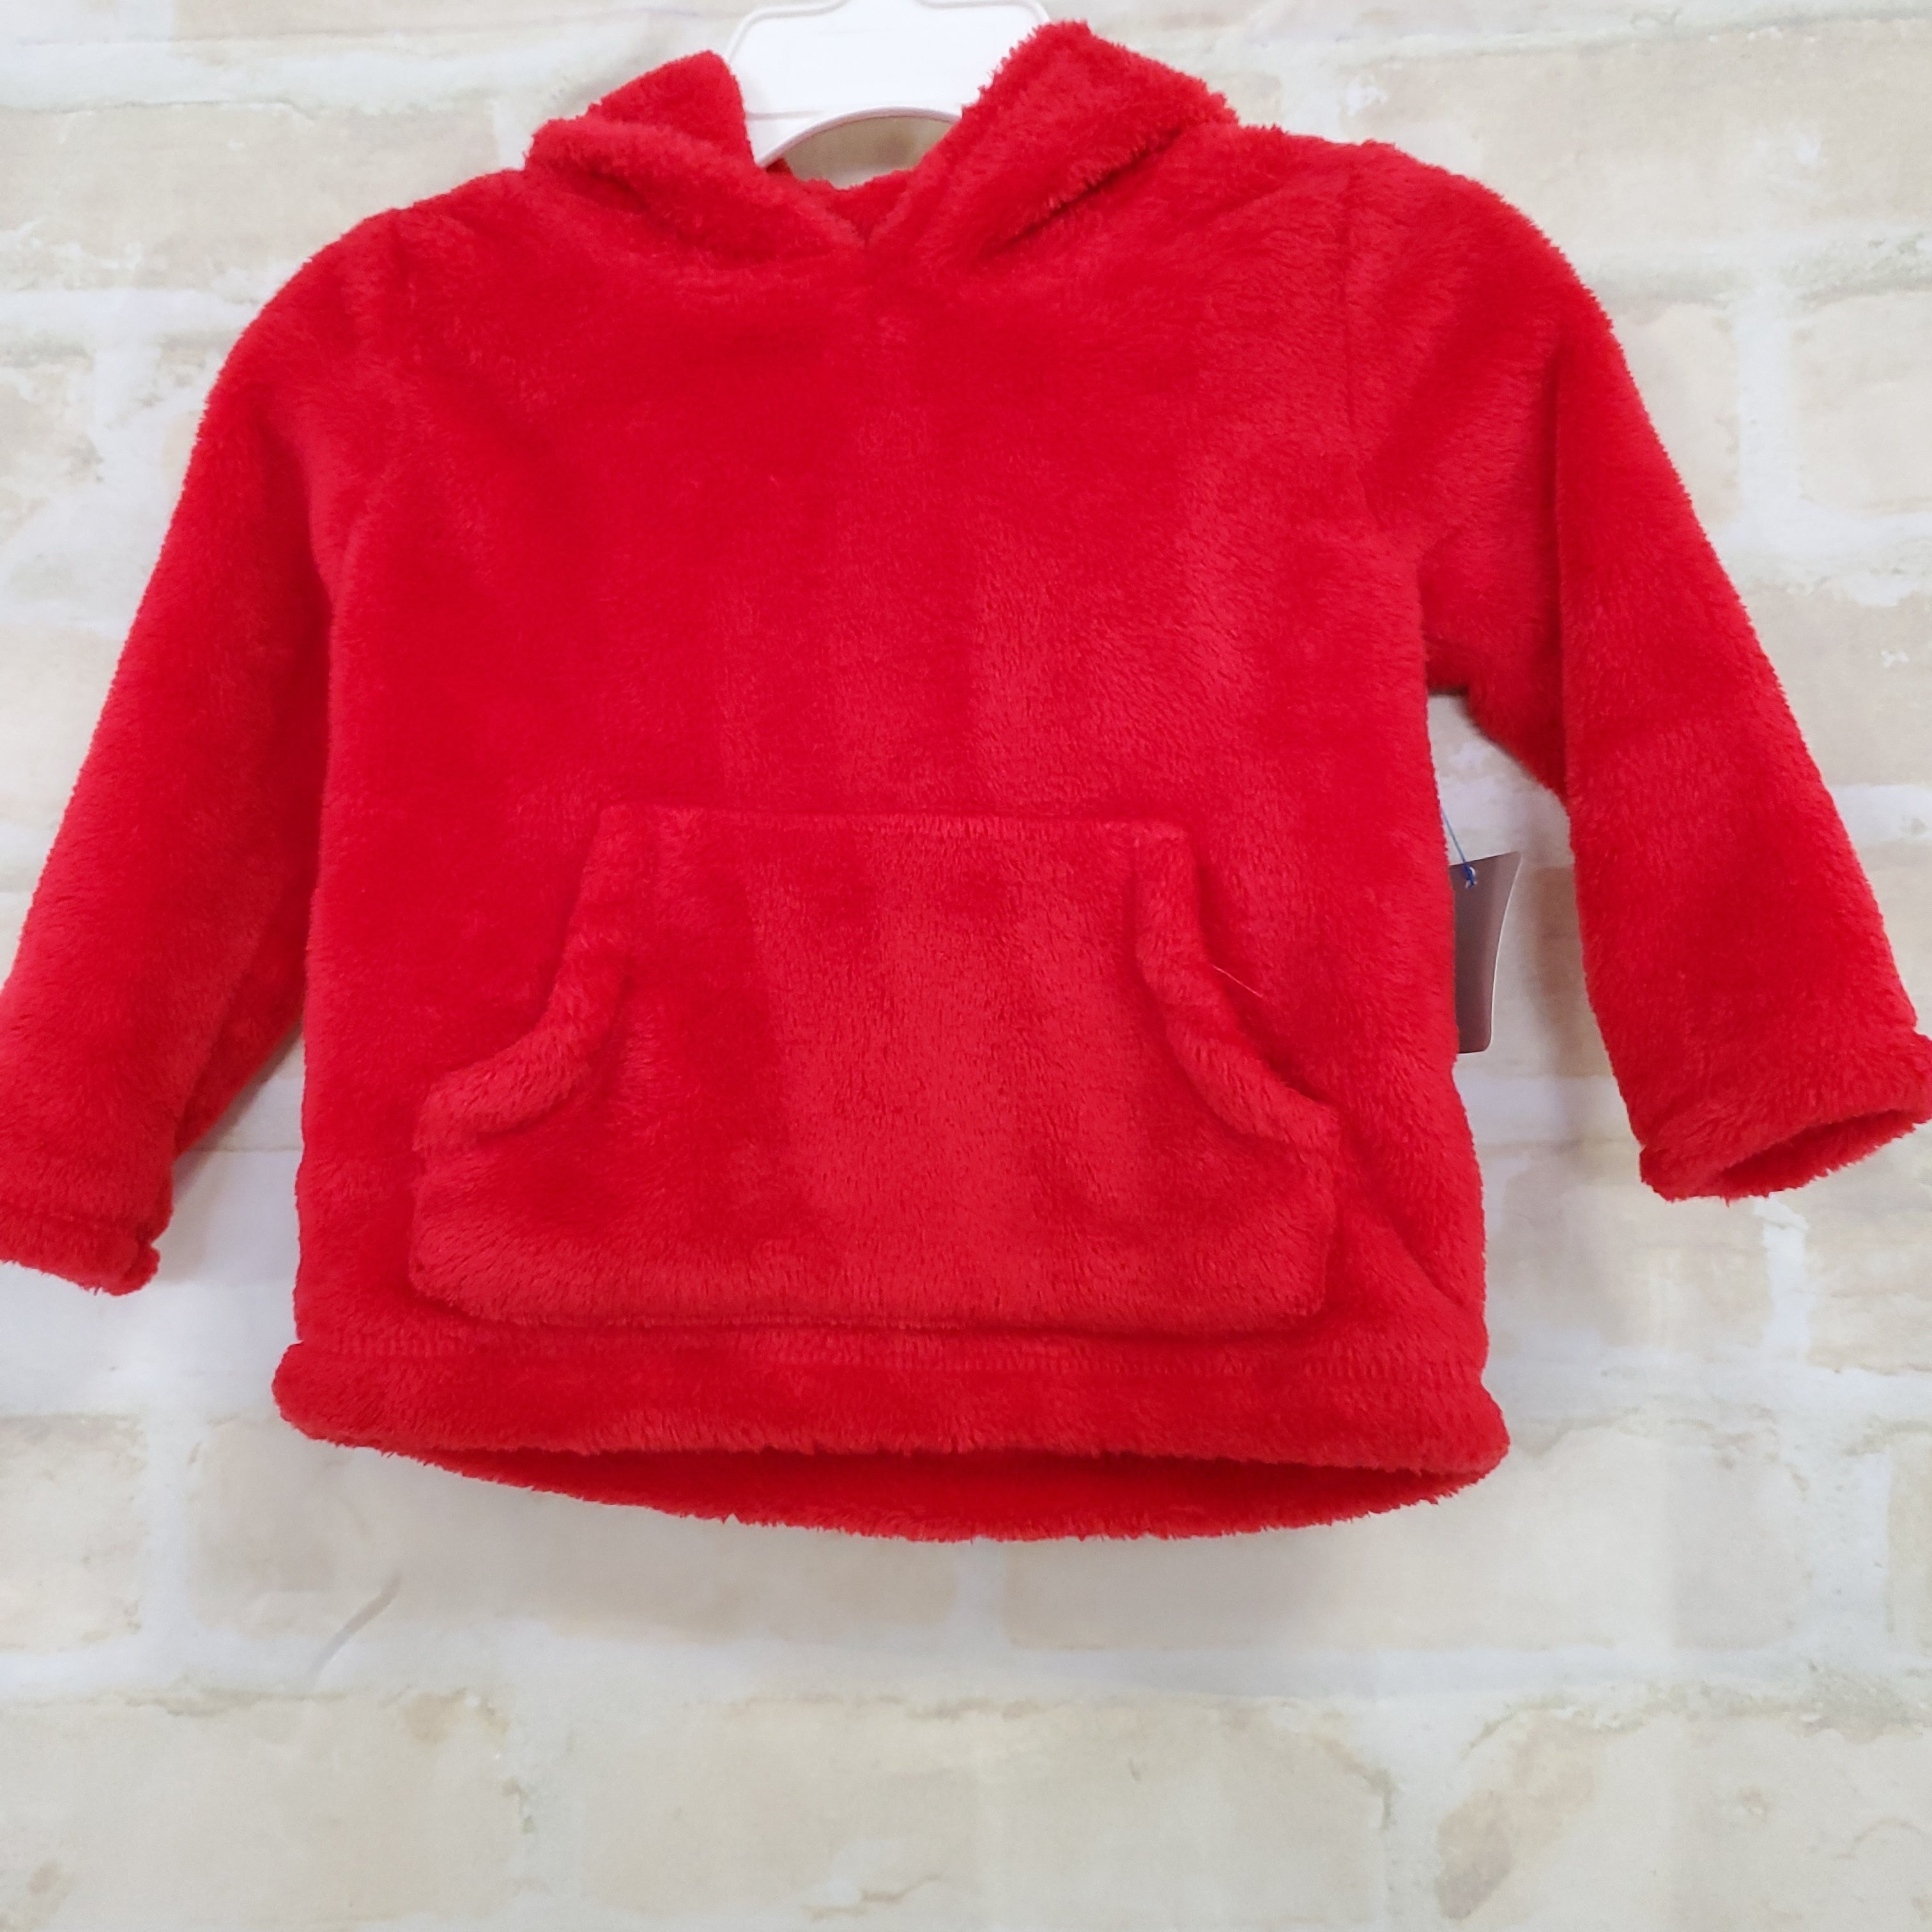 Carters boys/girls jacket red hooded pullover 12m